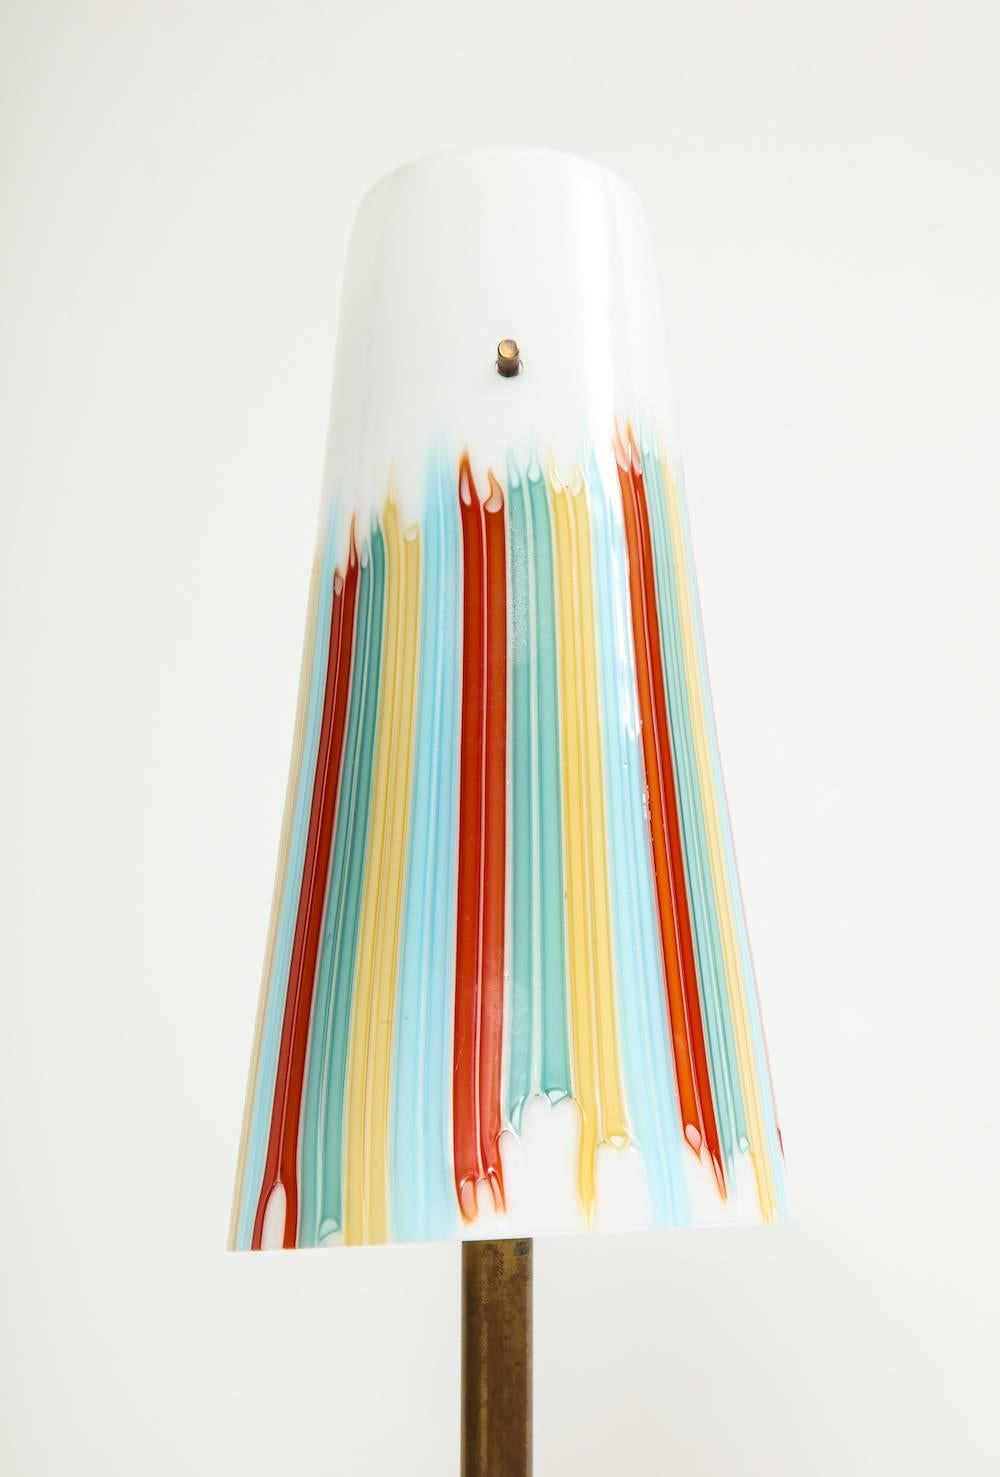 Unique table lamp by Roberto Giulio Rida.
Irregular chunk of brilliant turquoise-colored glass. Vintage, Venini glass cone shade, and finial. One candelabra socket and satin brass mounts.